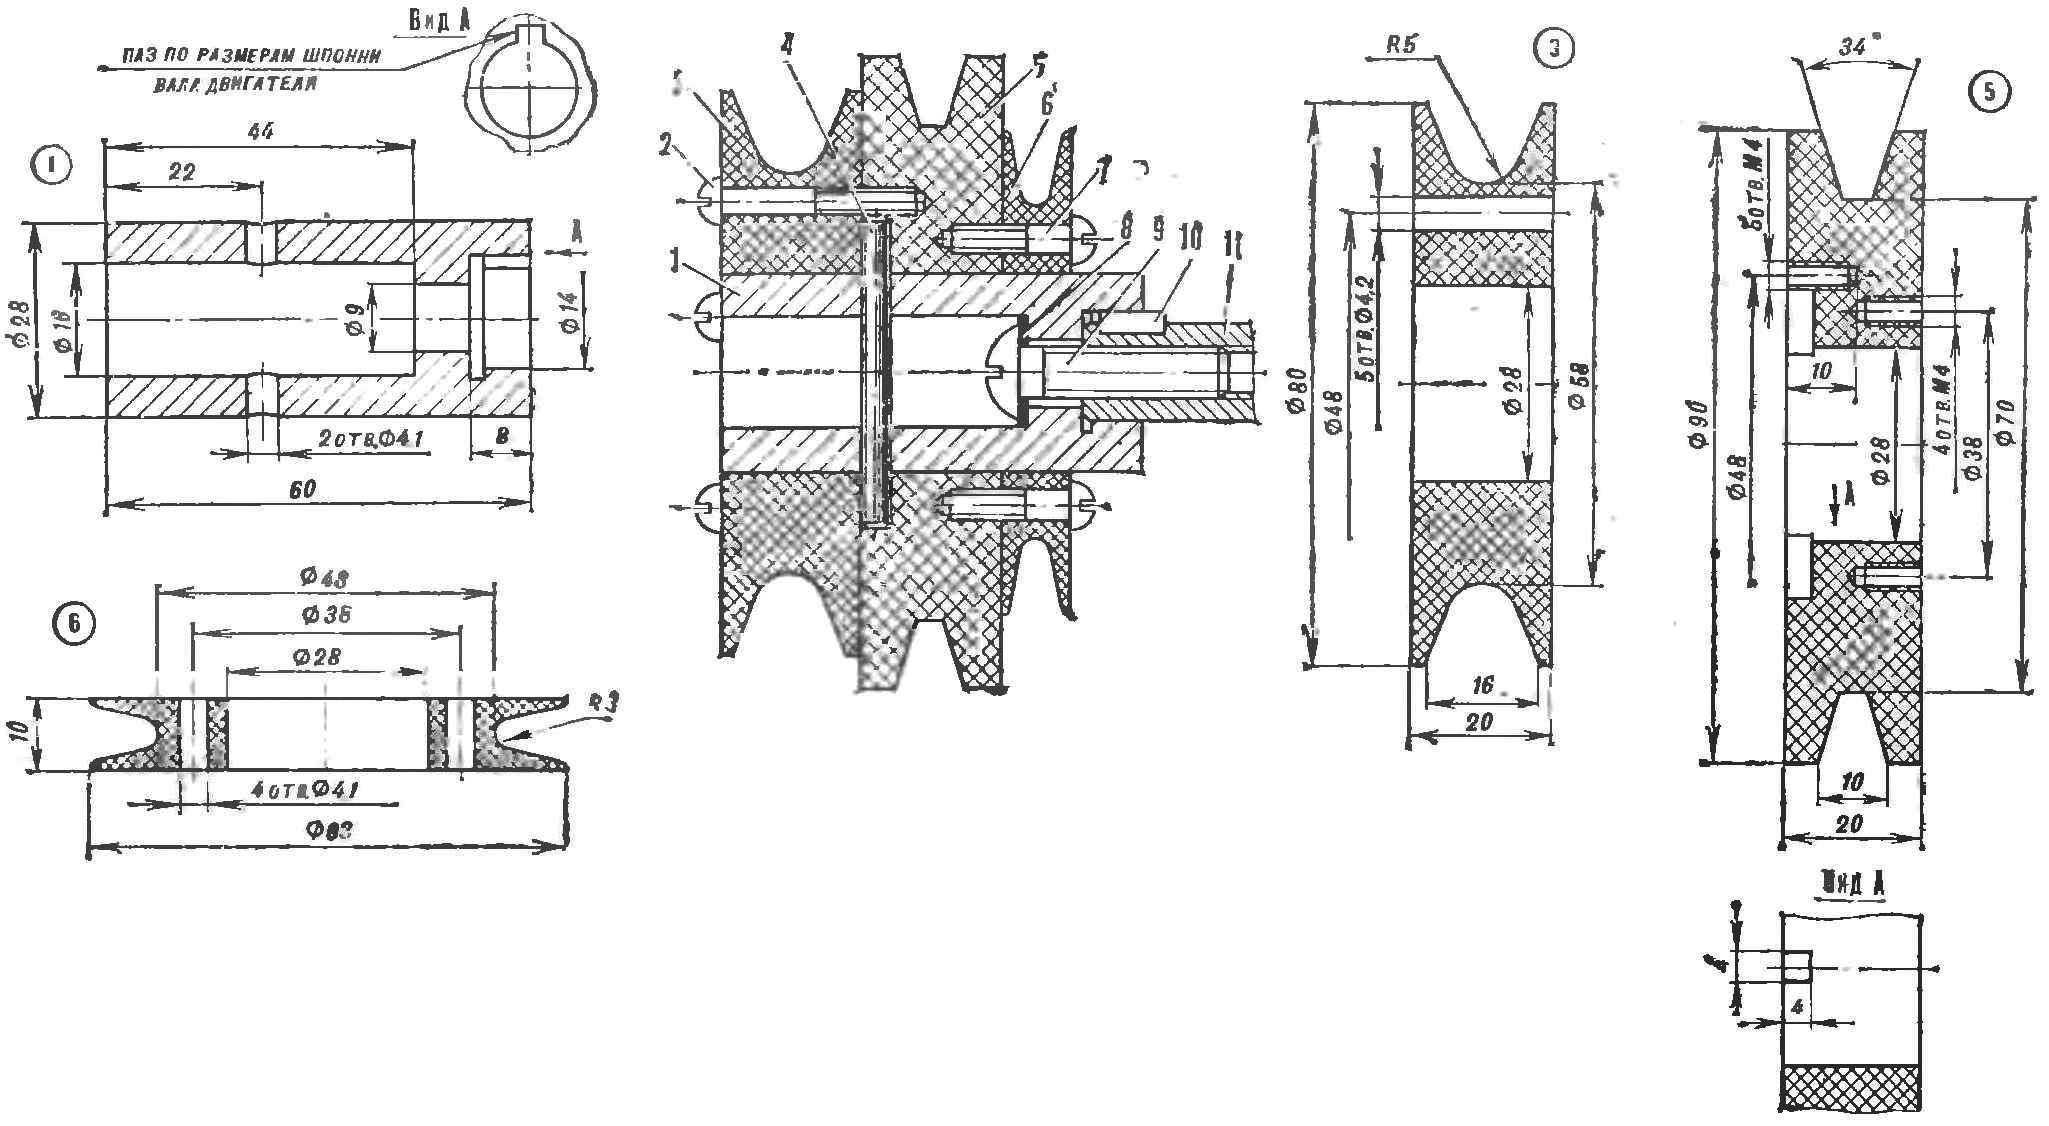 Fig. 2. Block leading sheave Assembly